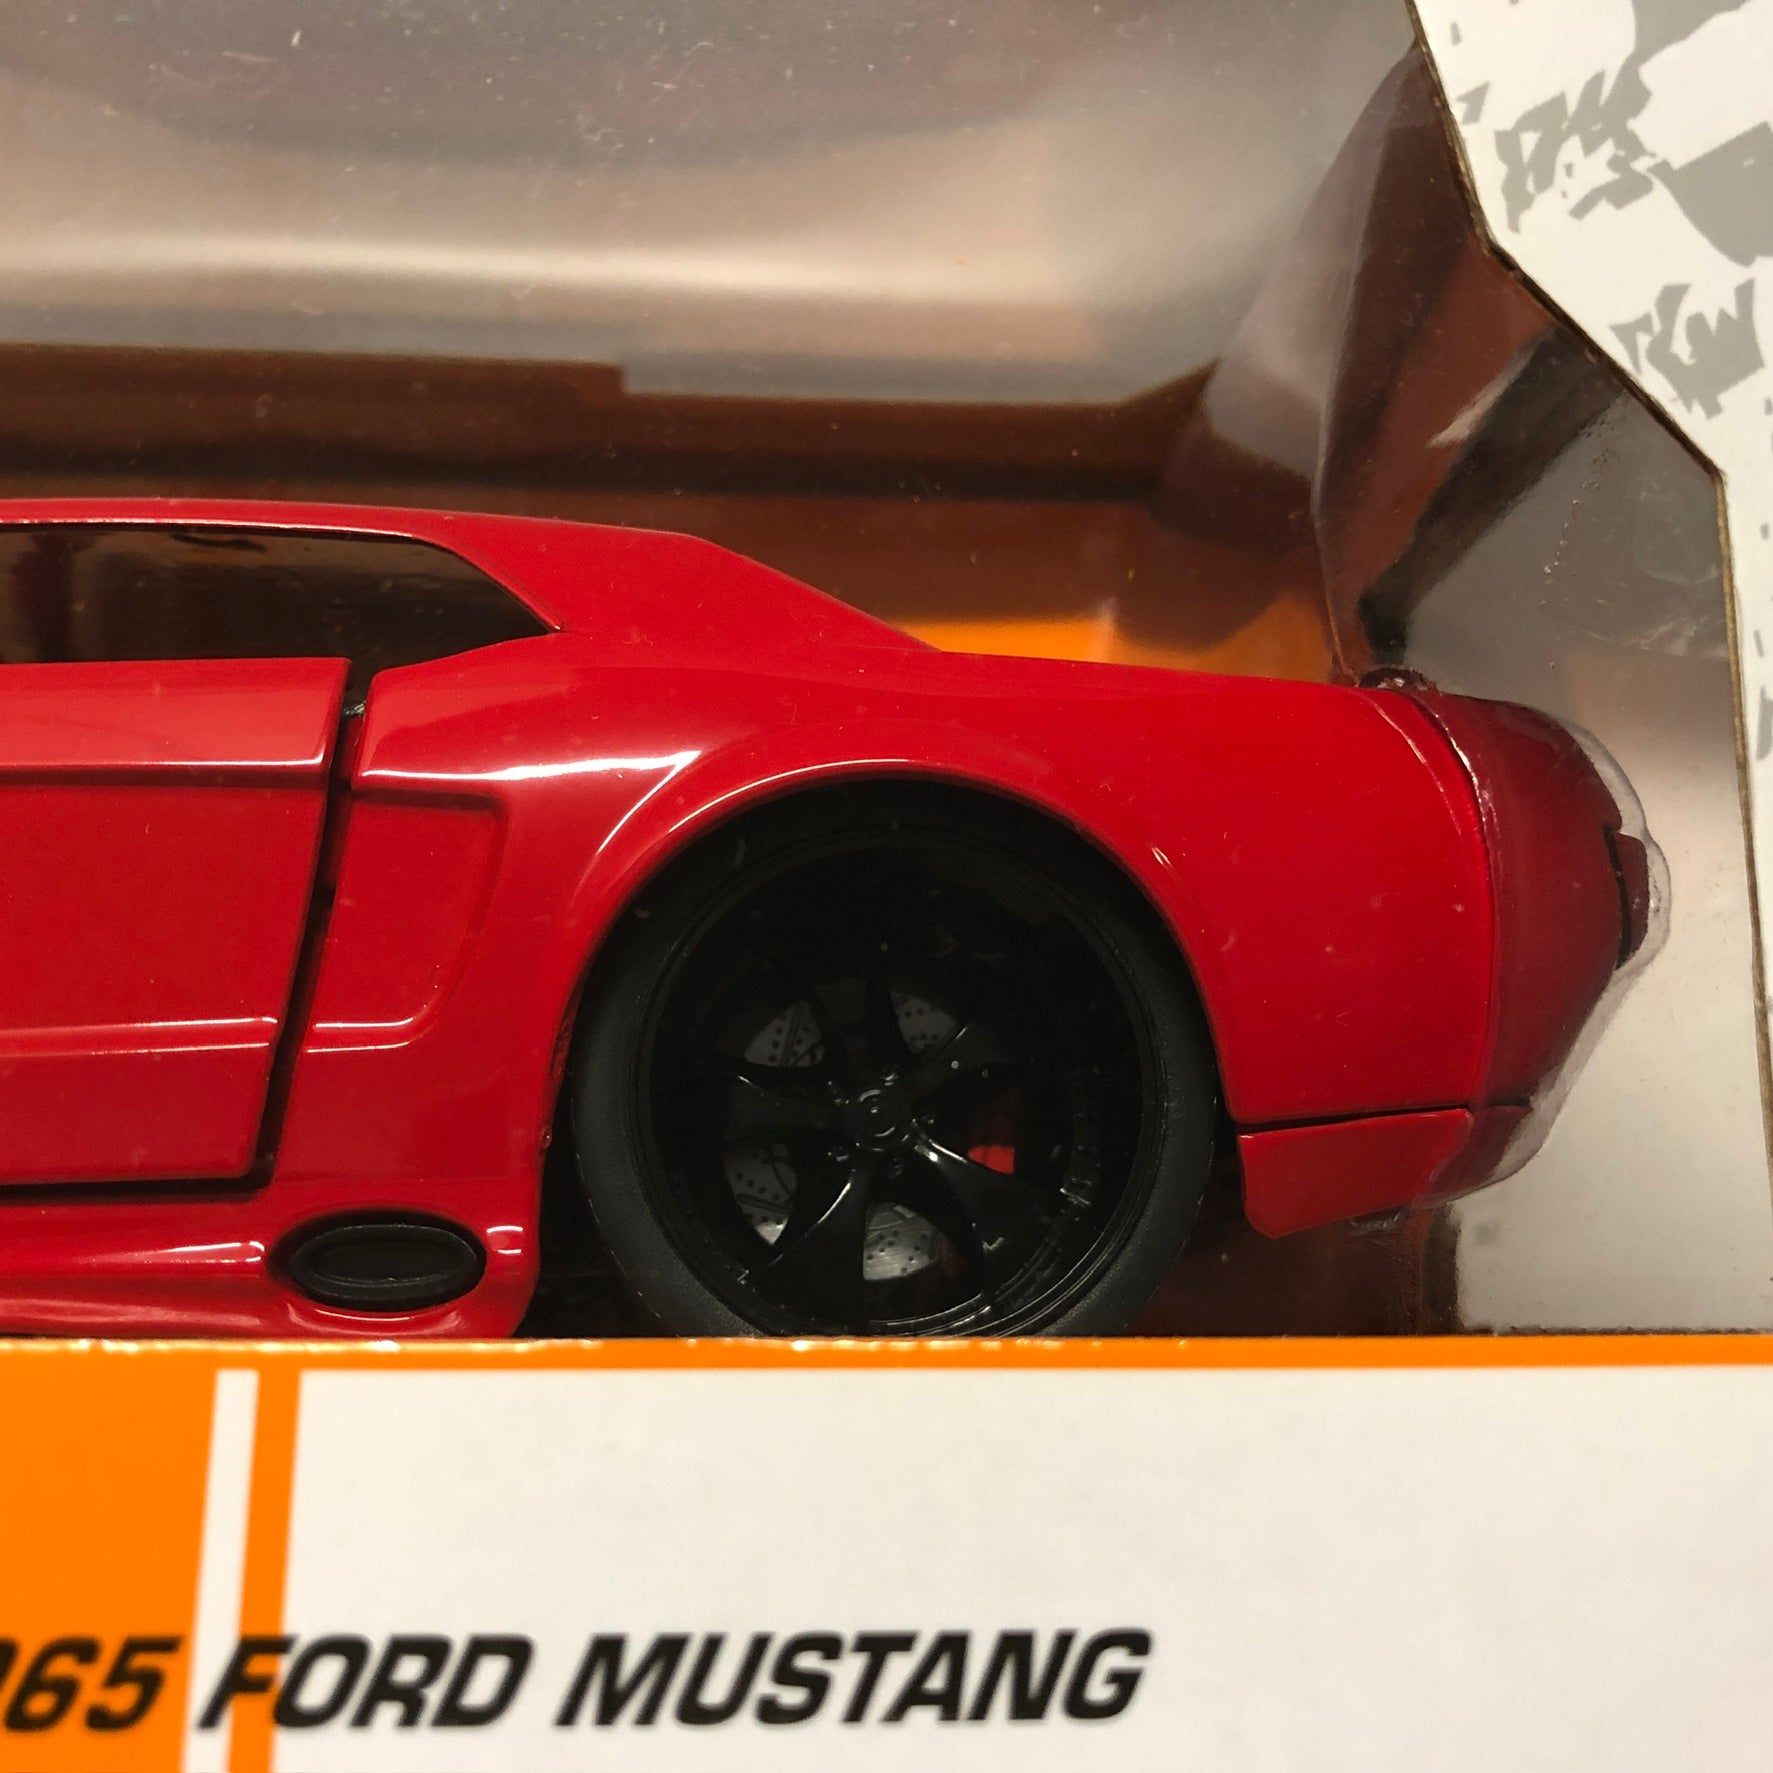  Jada Toys 1965 Ford Mustang Hardtop 1:24 Scale